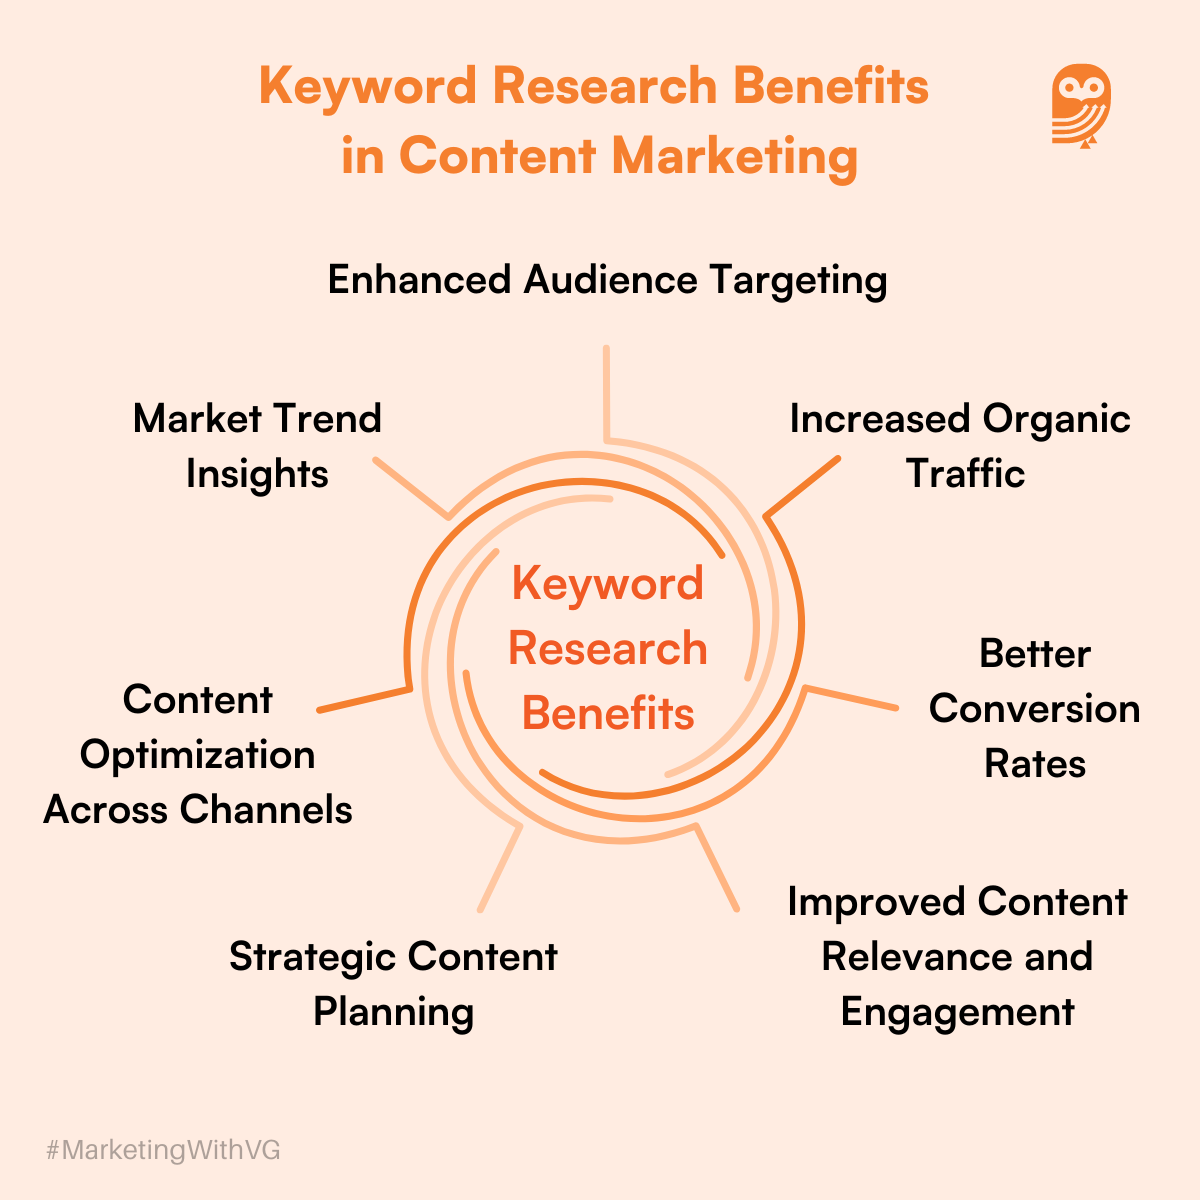 Keyword Research Benefits in Content Marketing